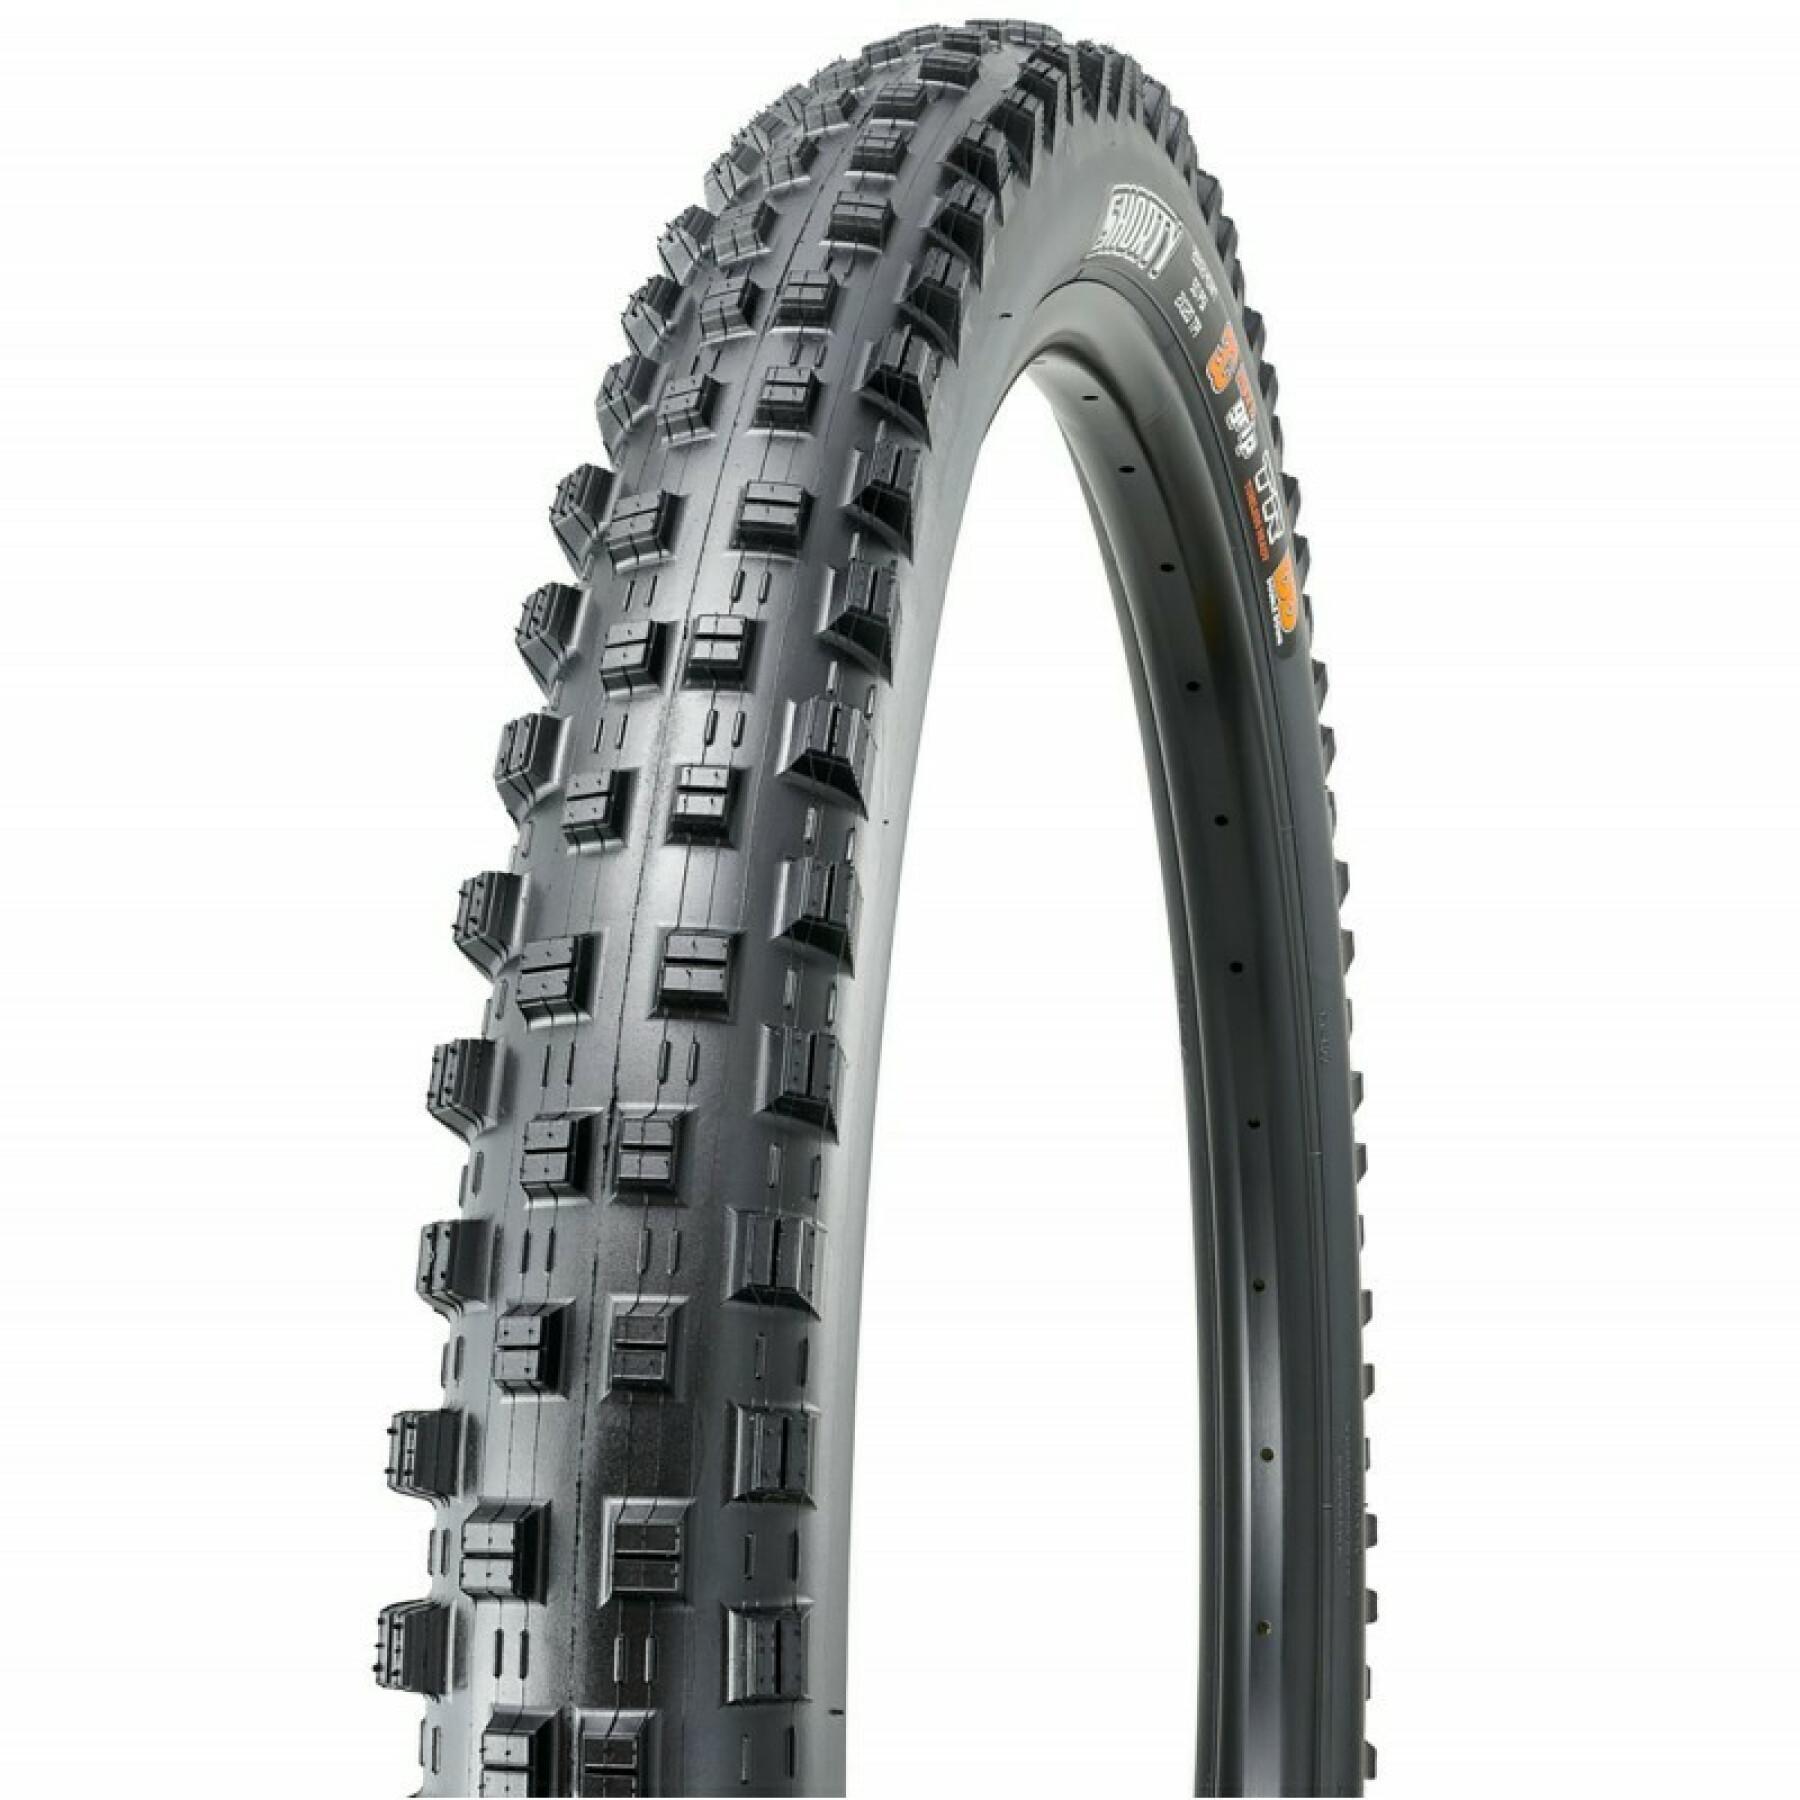 Zachte band Maxxis Shorty 29x2.40wt 3c Grip / Tubeless Ready / Double Down